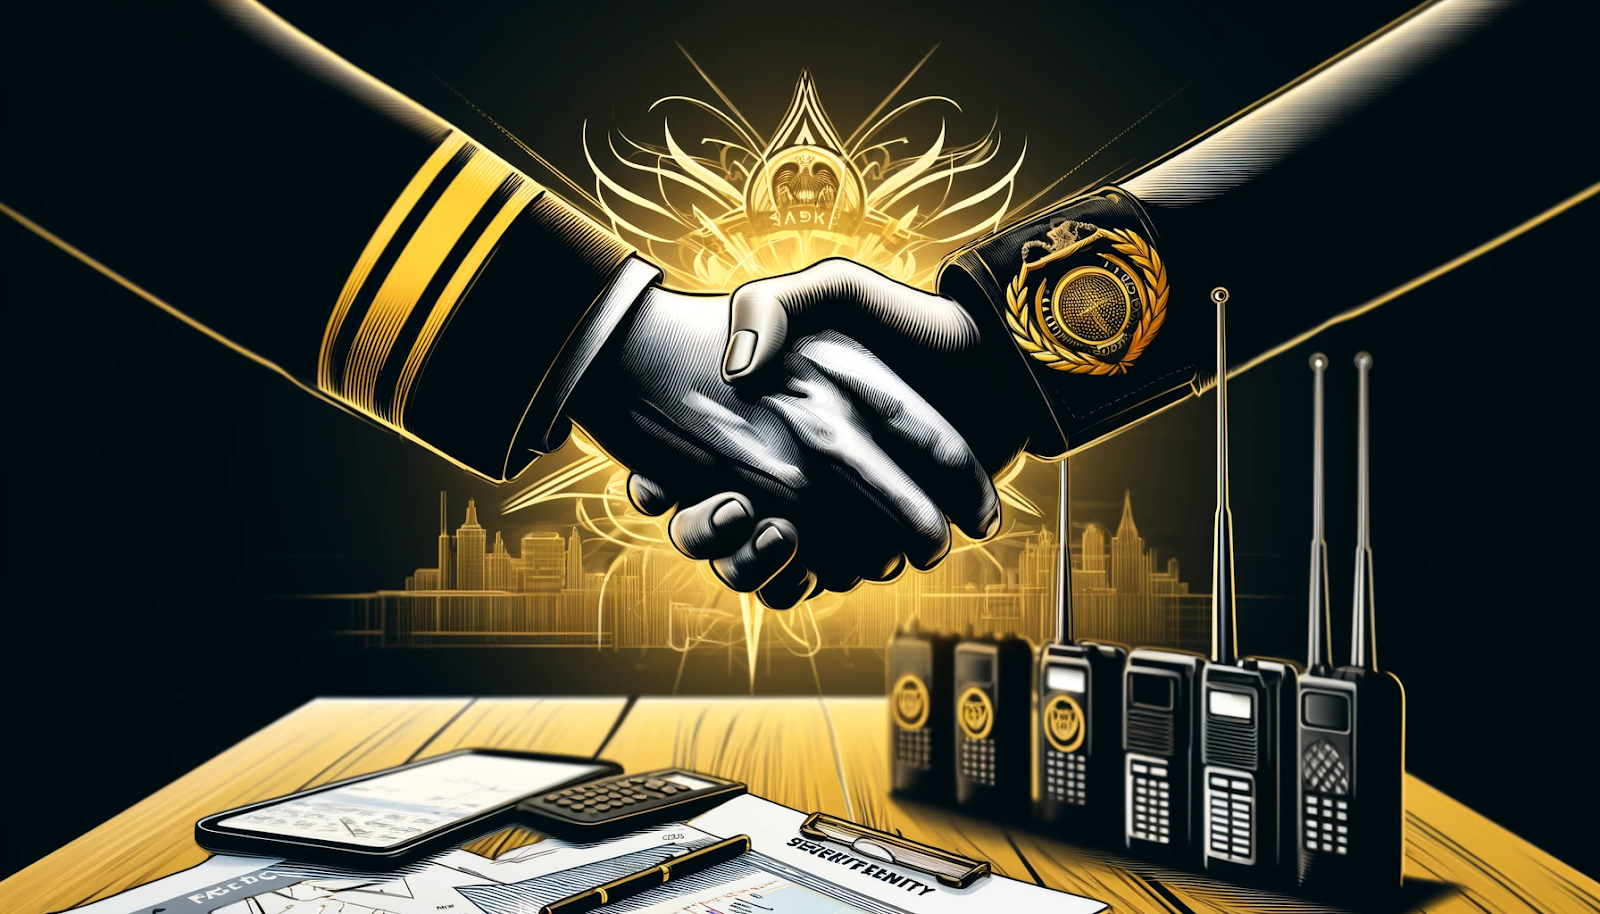 A symbolic image representing liaising with local law enforcement for event planning. Features a handshake between a law enforcement officer and a security manager over a table with event security documents, radios, and a map